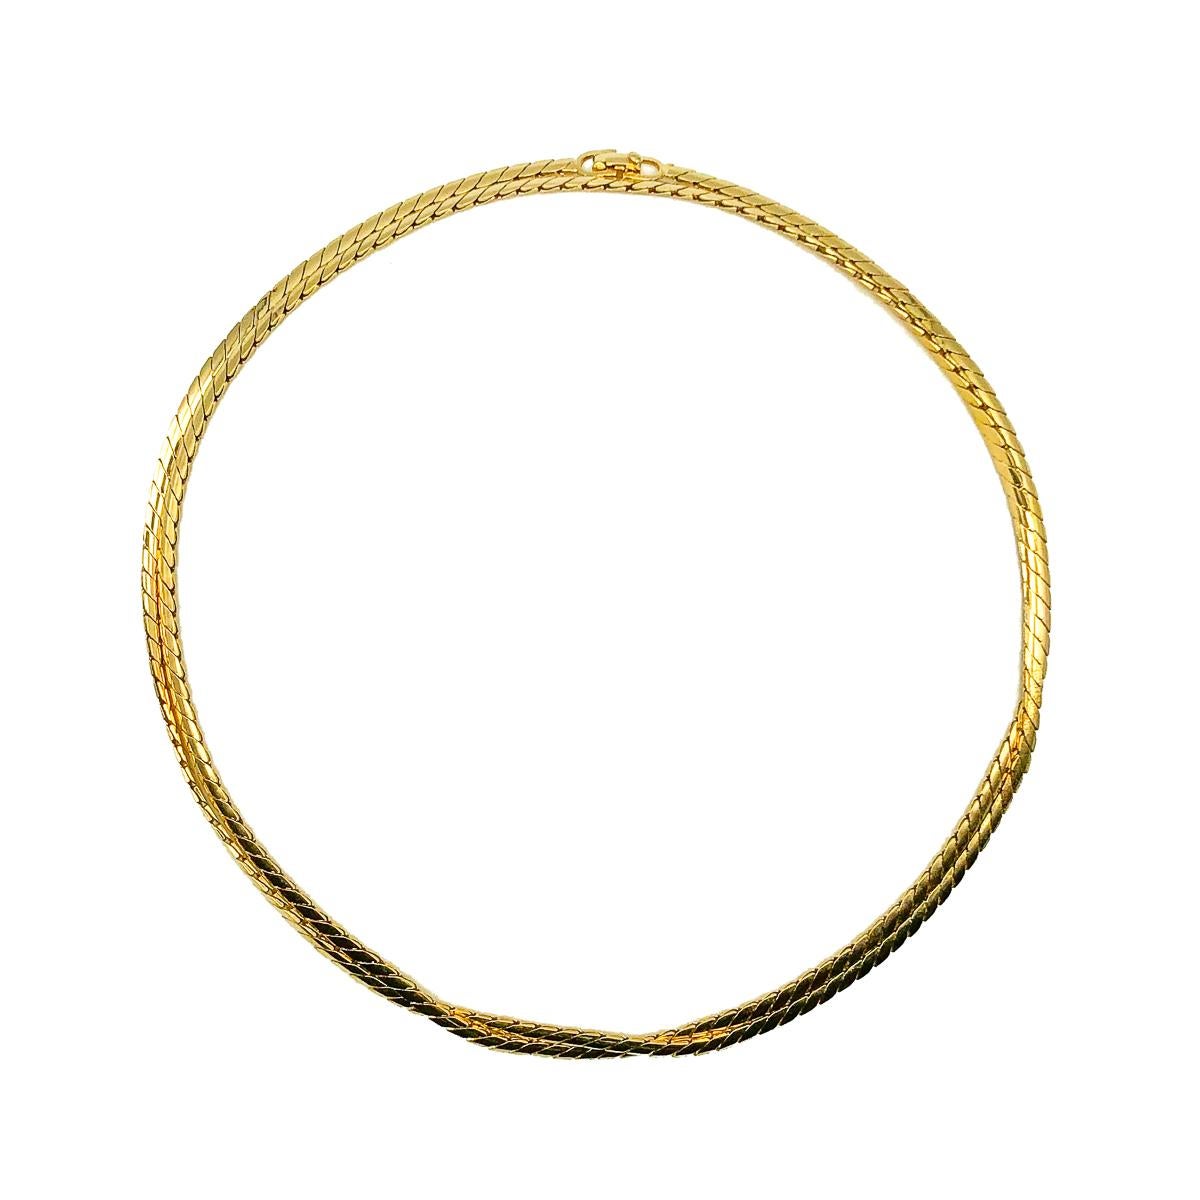 A wonderfully long Vintage Dior Long Snake Chain. Crafted in gold plated metal. Very good vintage condition, signed, 90.5cms. A perfect jewel box staple from the Dior archive that will prove invaluable time and time again. Wear it long and loose or